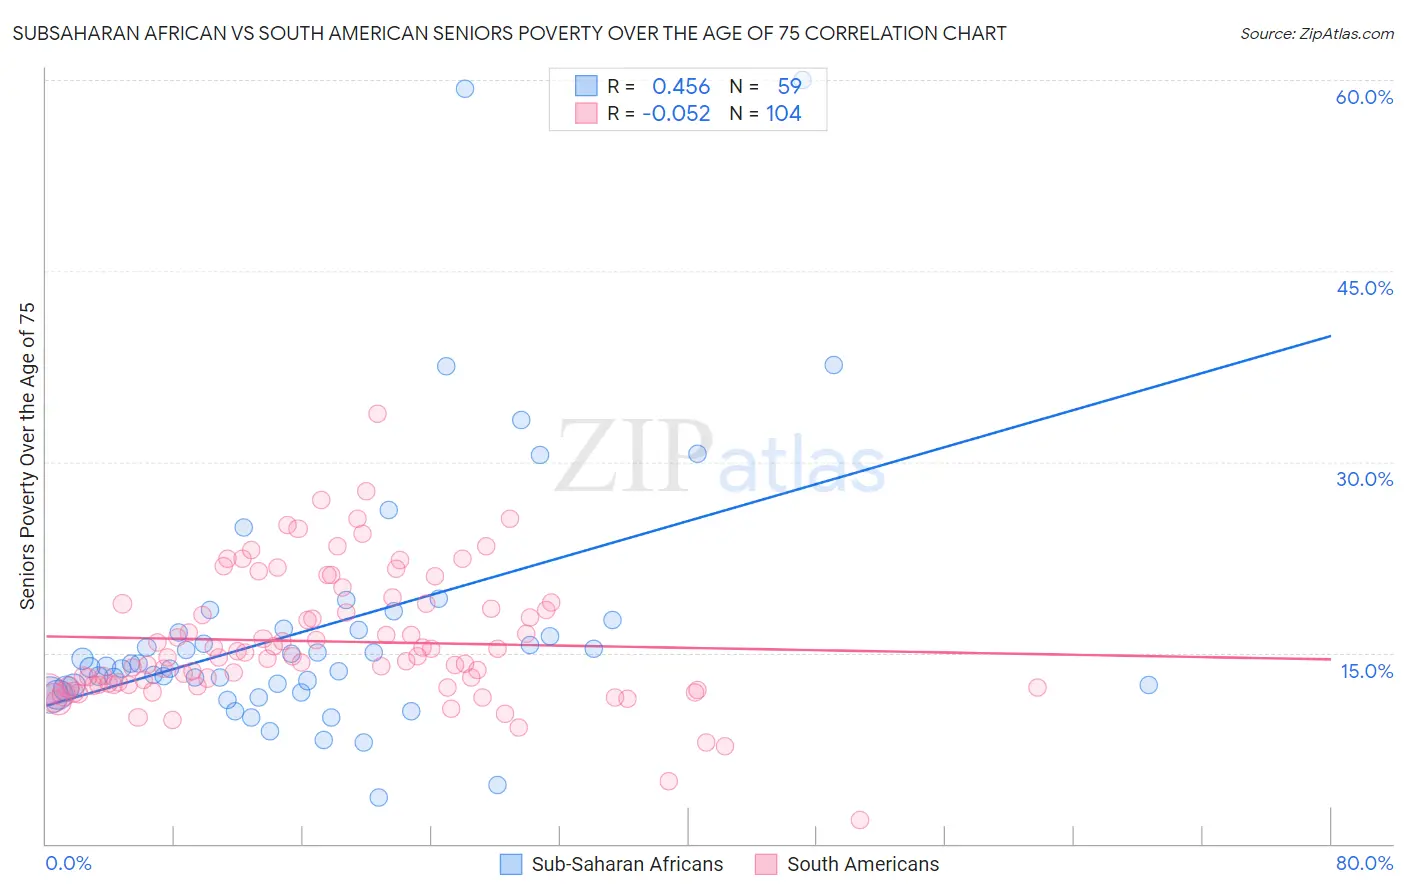 Subsaharan African vs South American Seniors Poverty Over the Age of 75